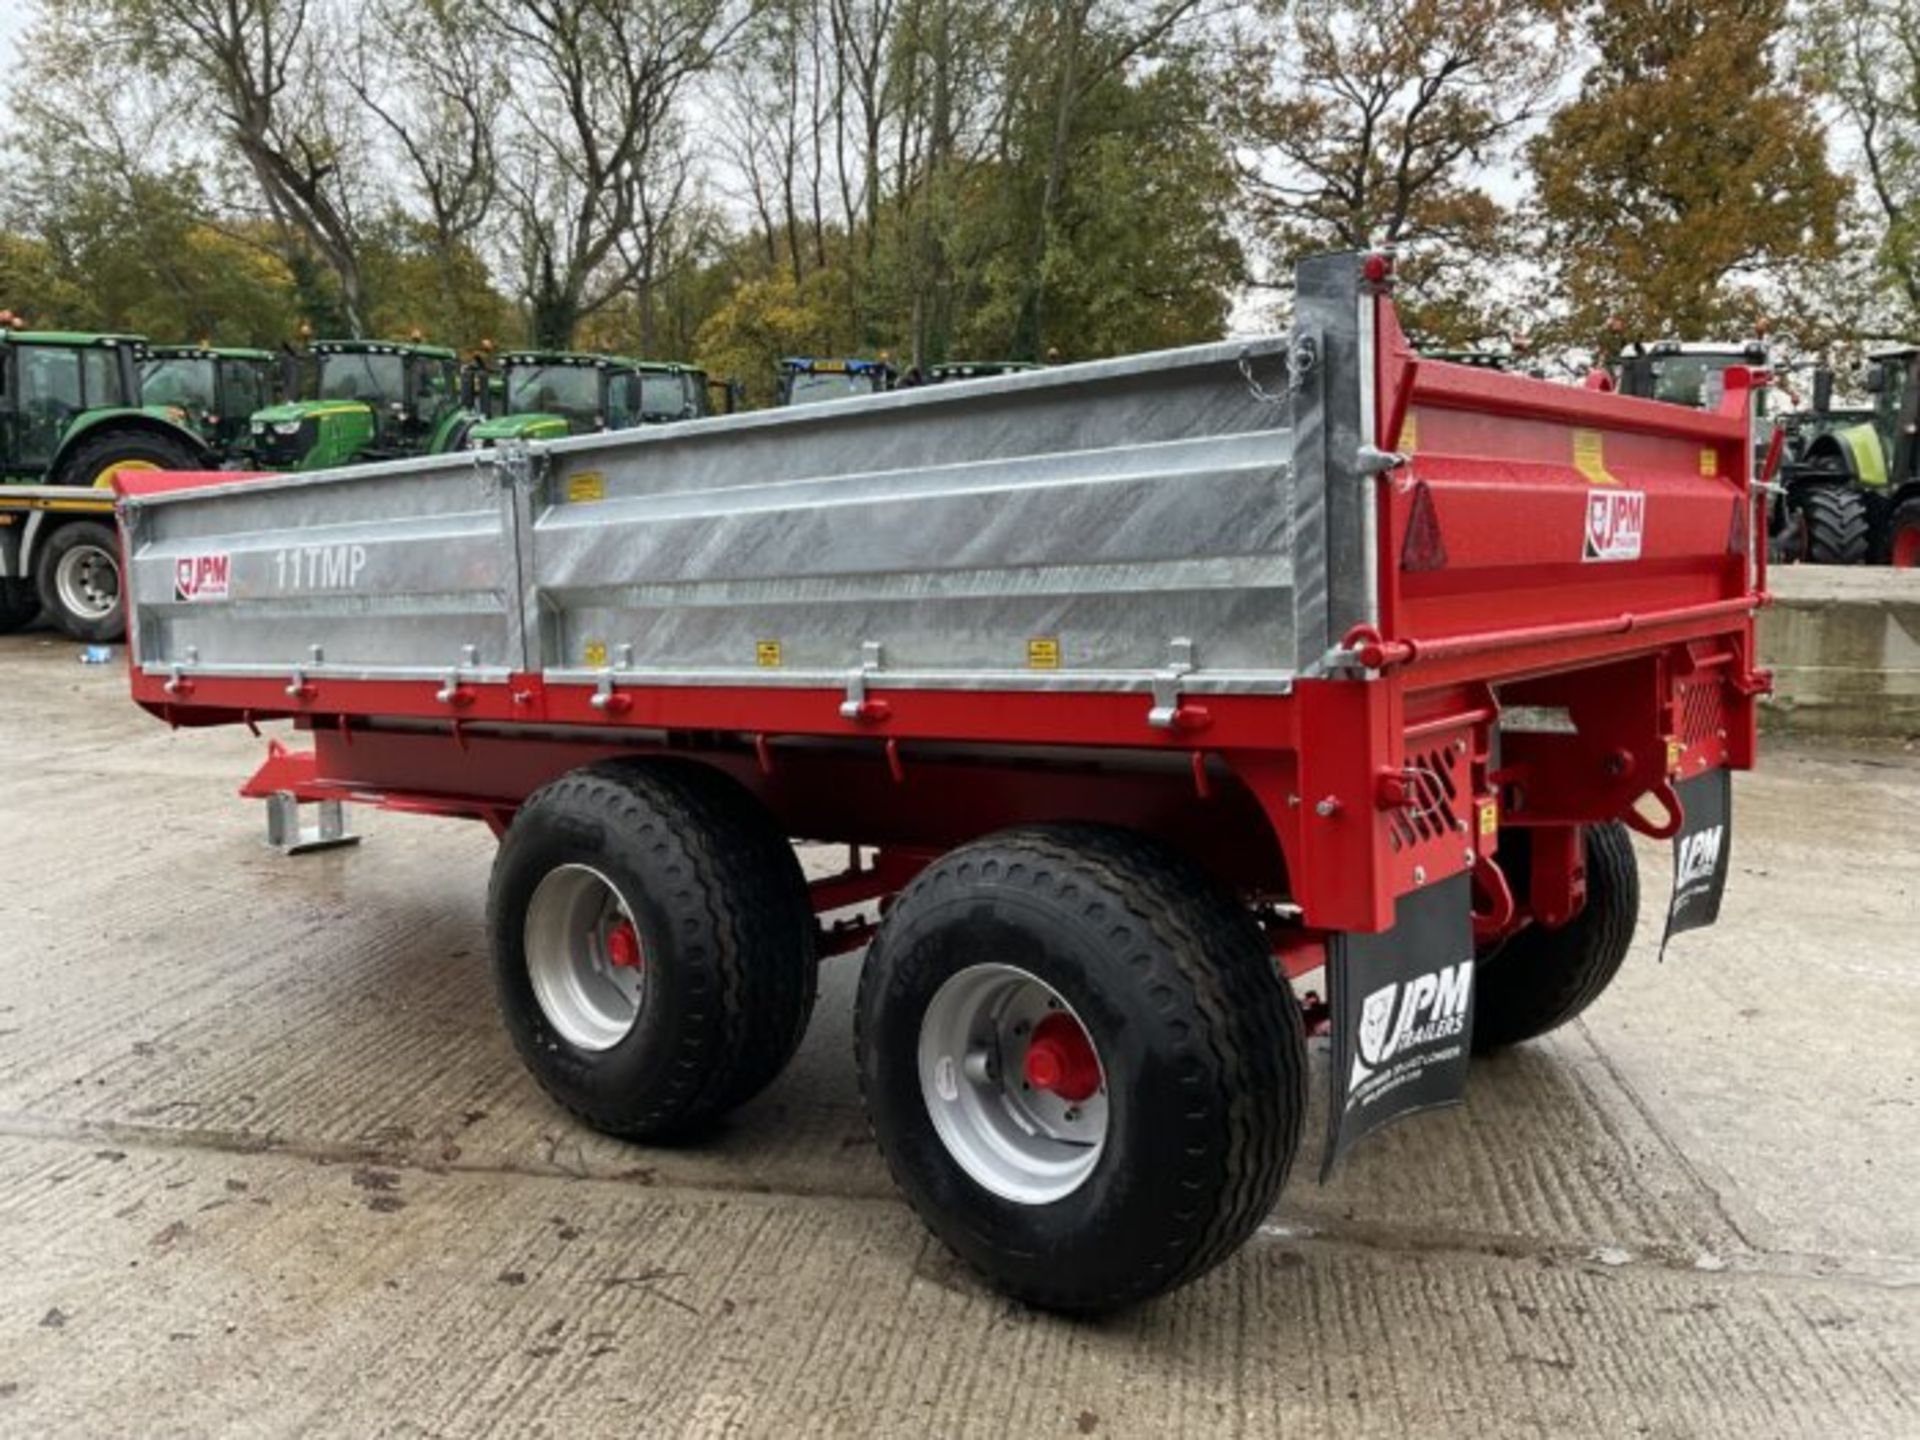 JPM 11 TMP. 11 TONNE MULTI PURPOSE TRAILER. DROP SIDE. WITH RAMPS. - Image 8 of 8